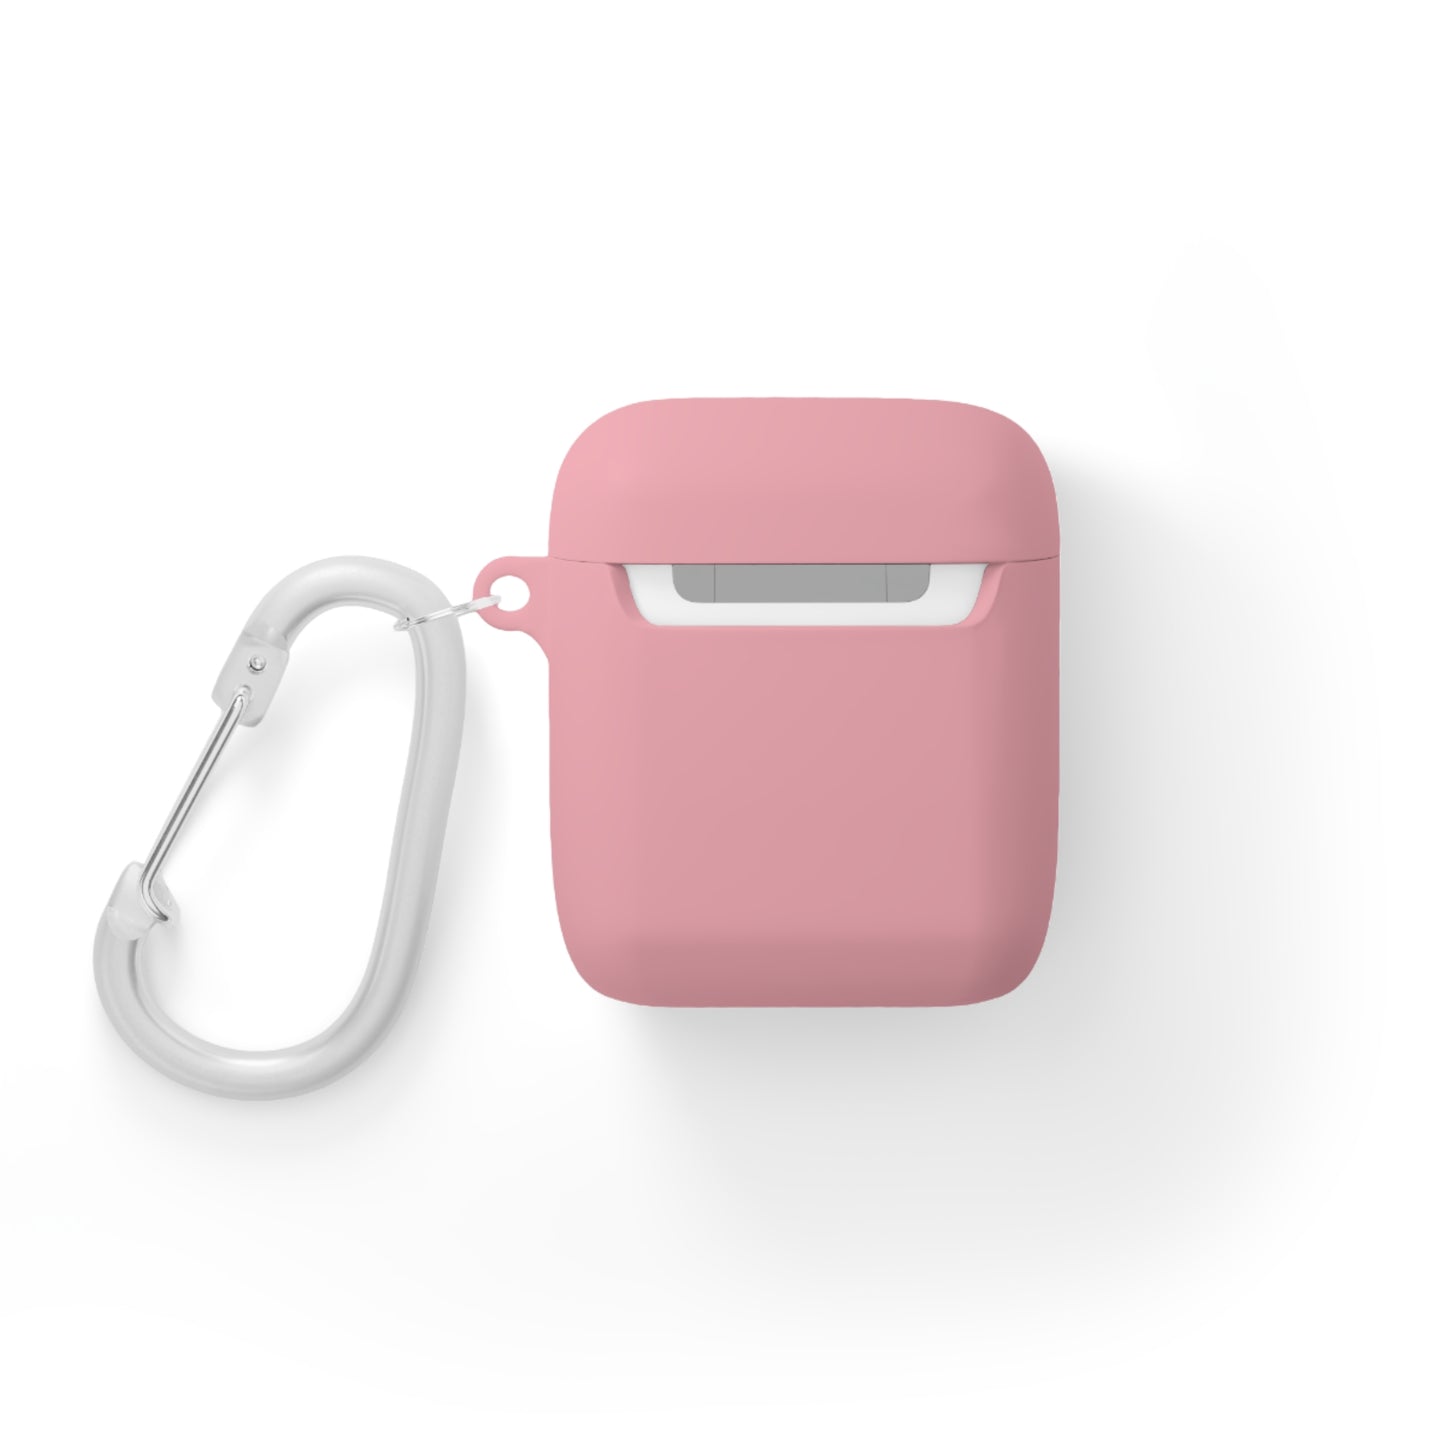 JGMC AirPods and AirPods Pro Case Cover